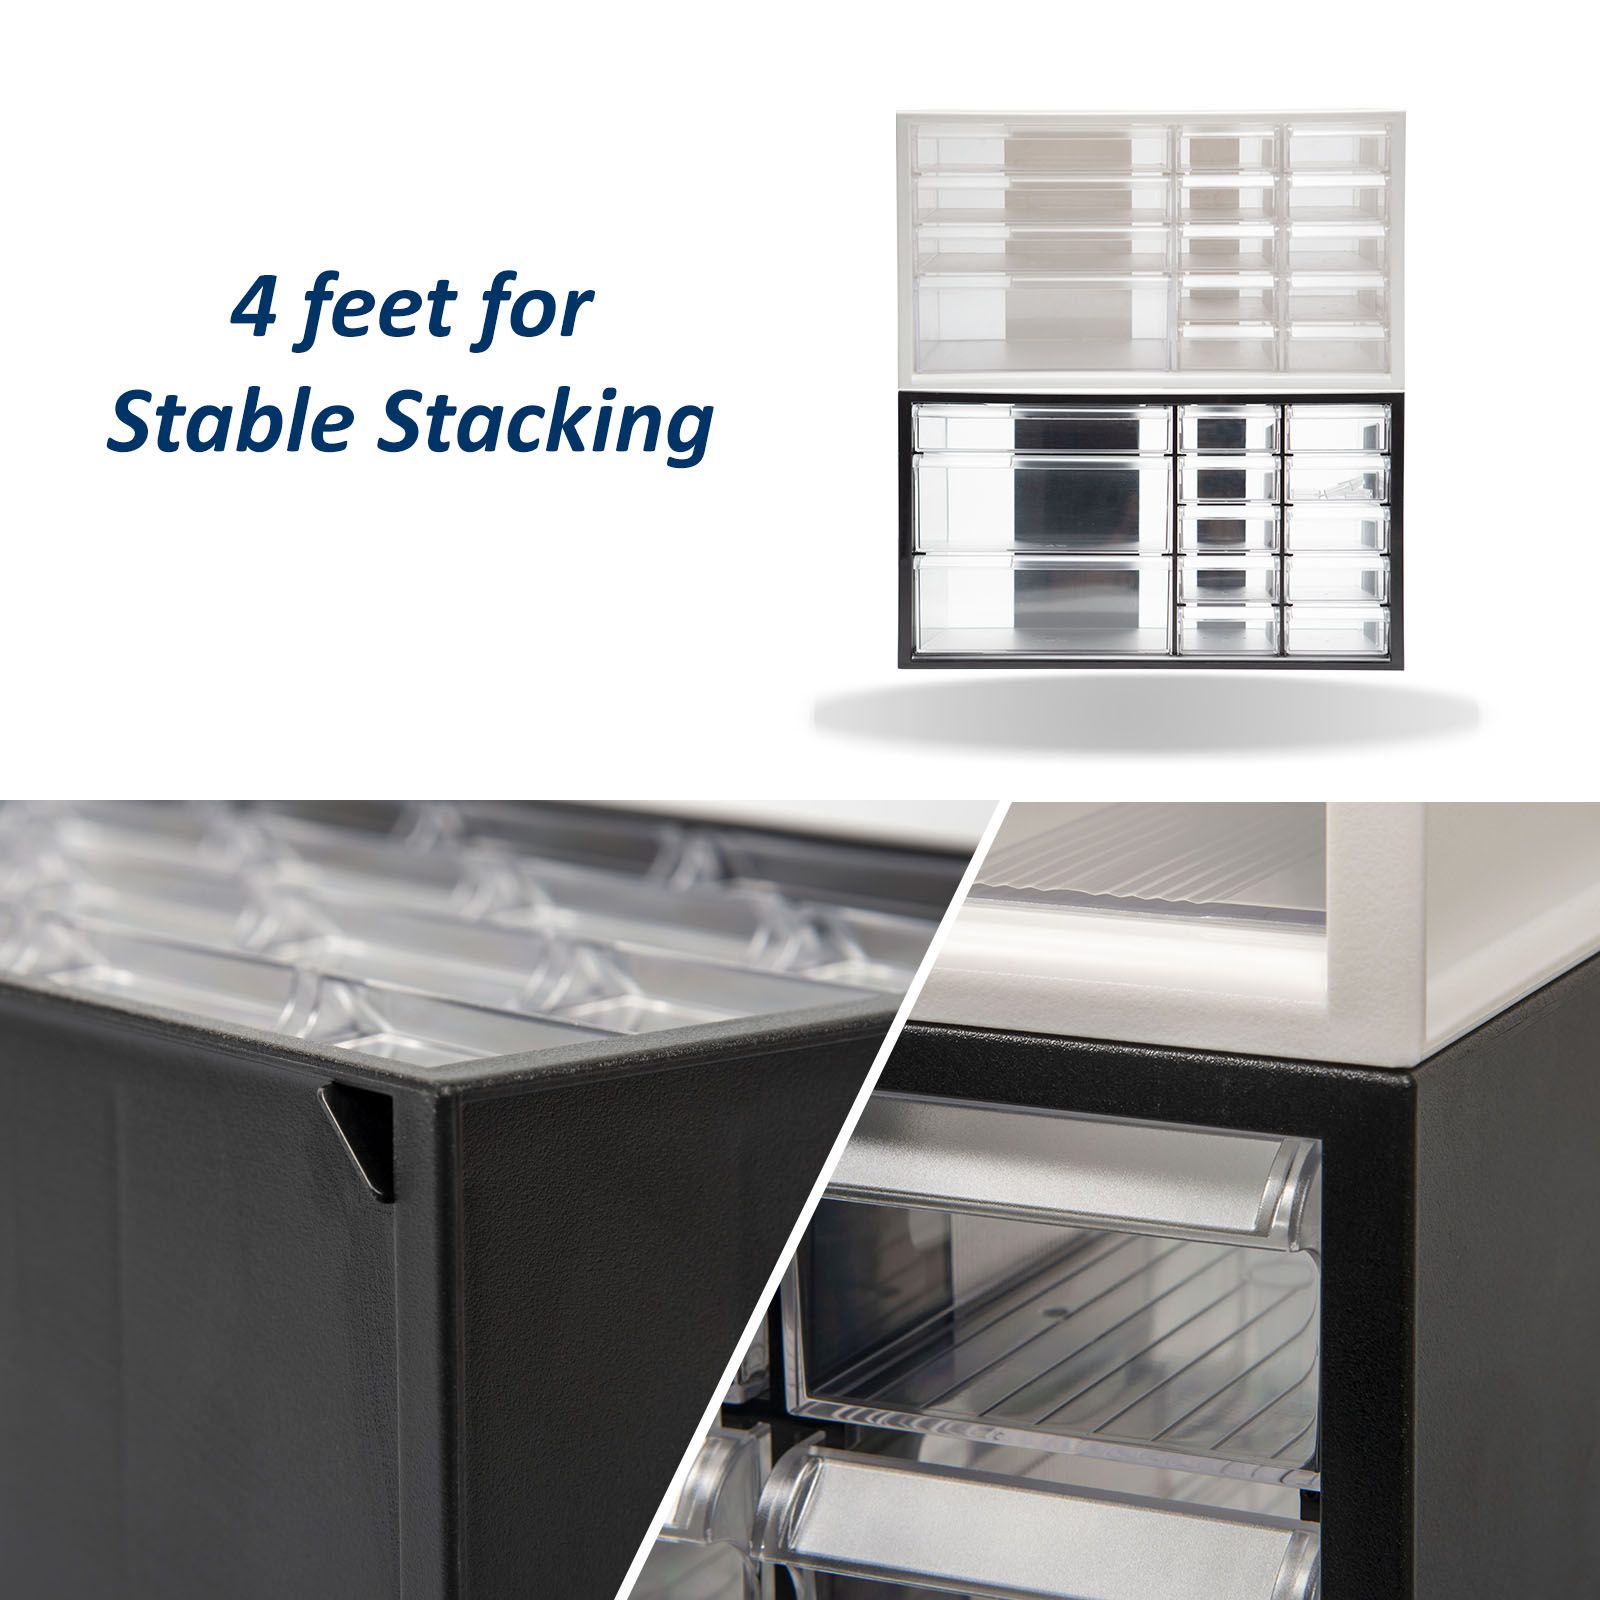 Built-in fixtures for stable stacking